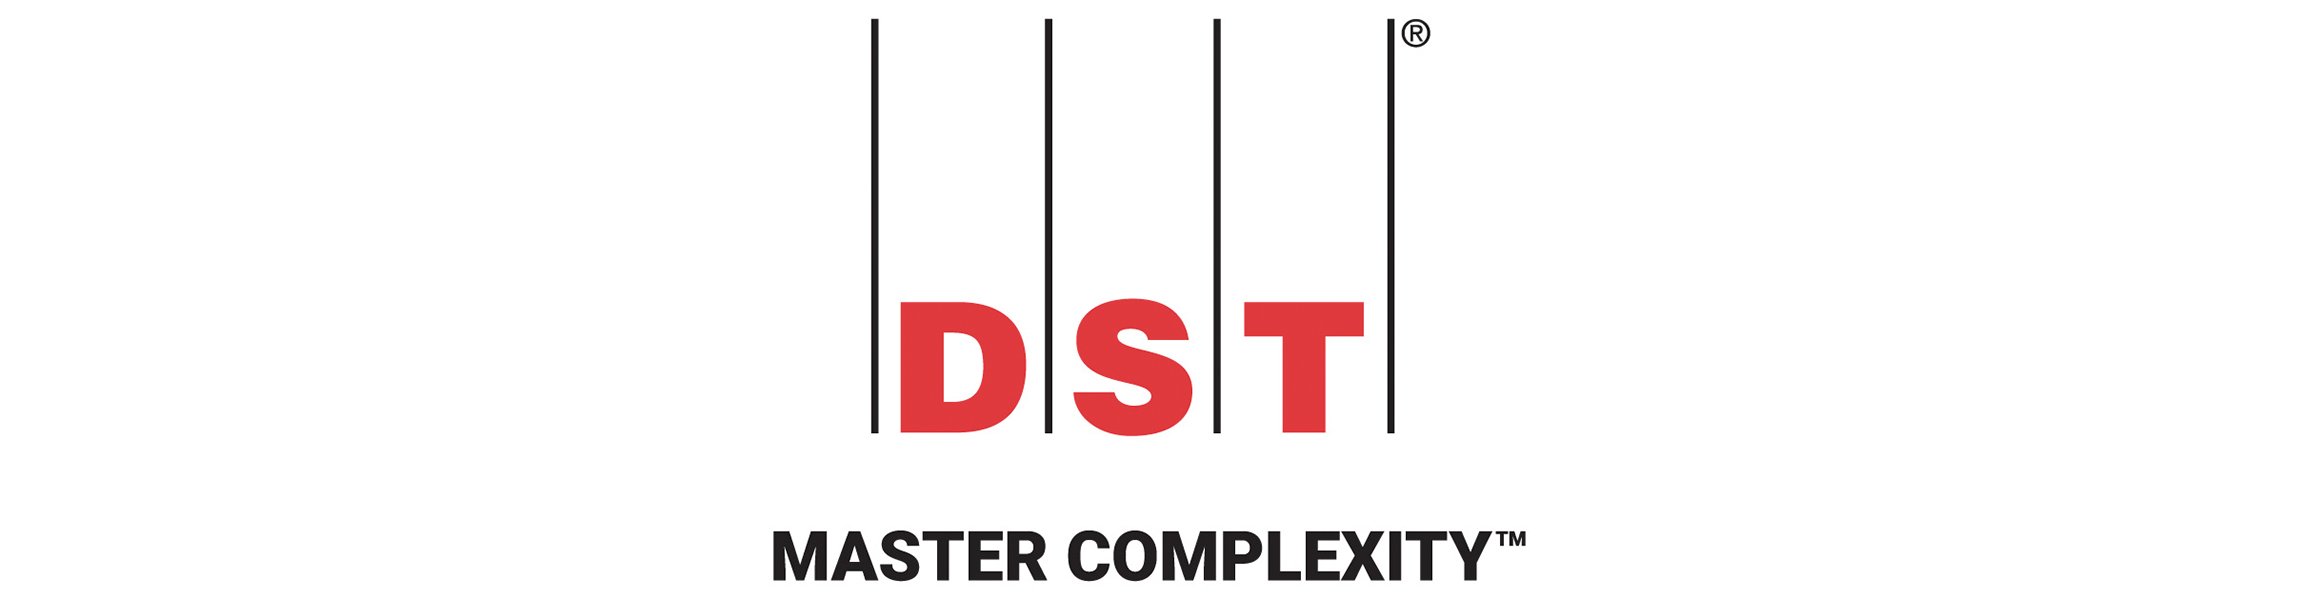 dst-systems